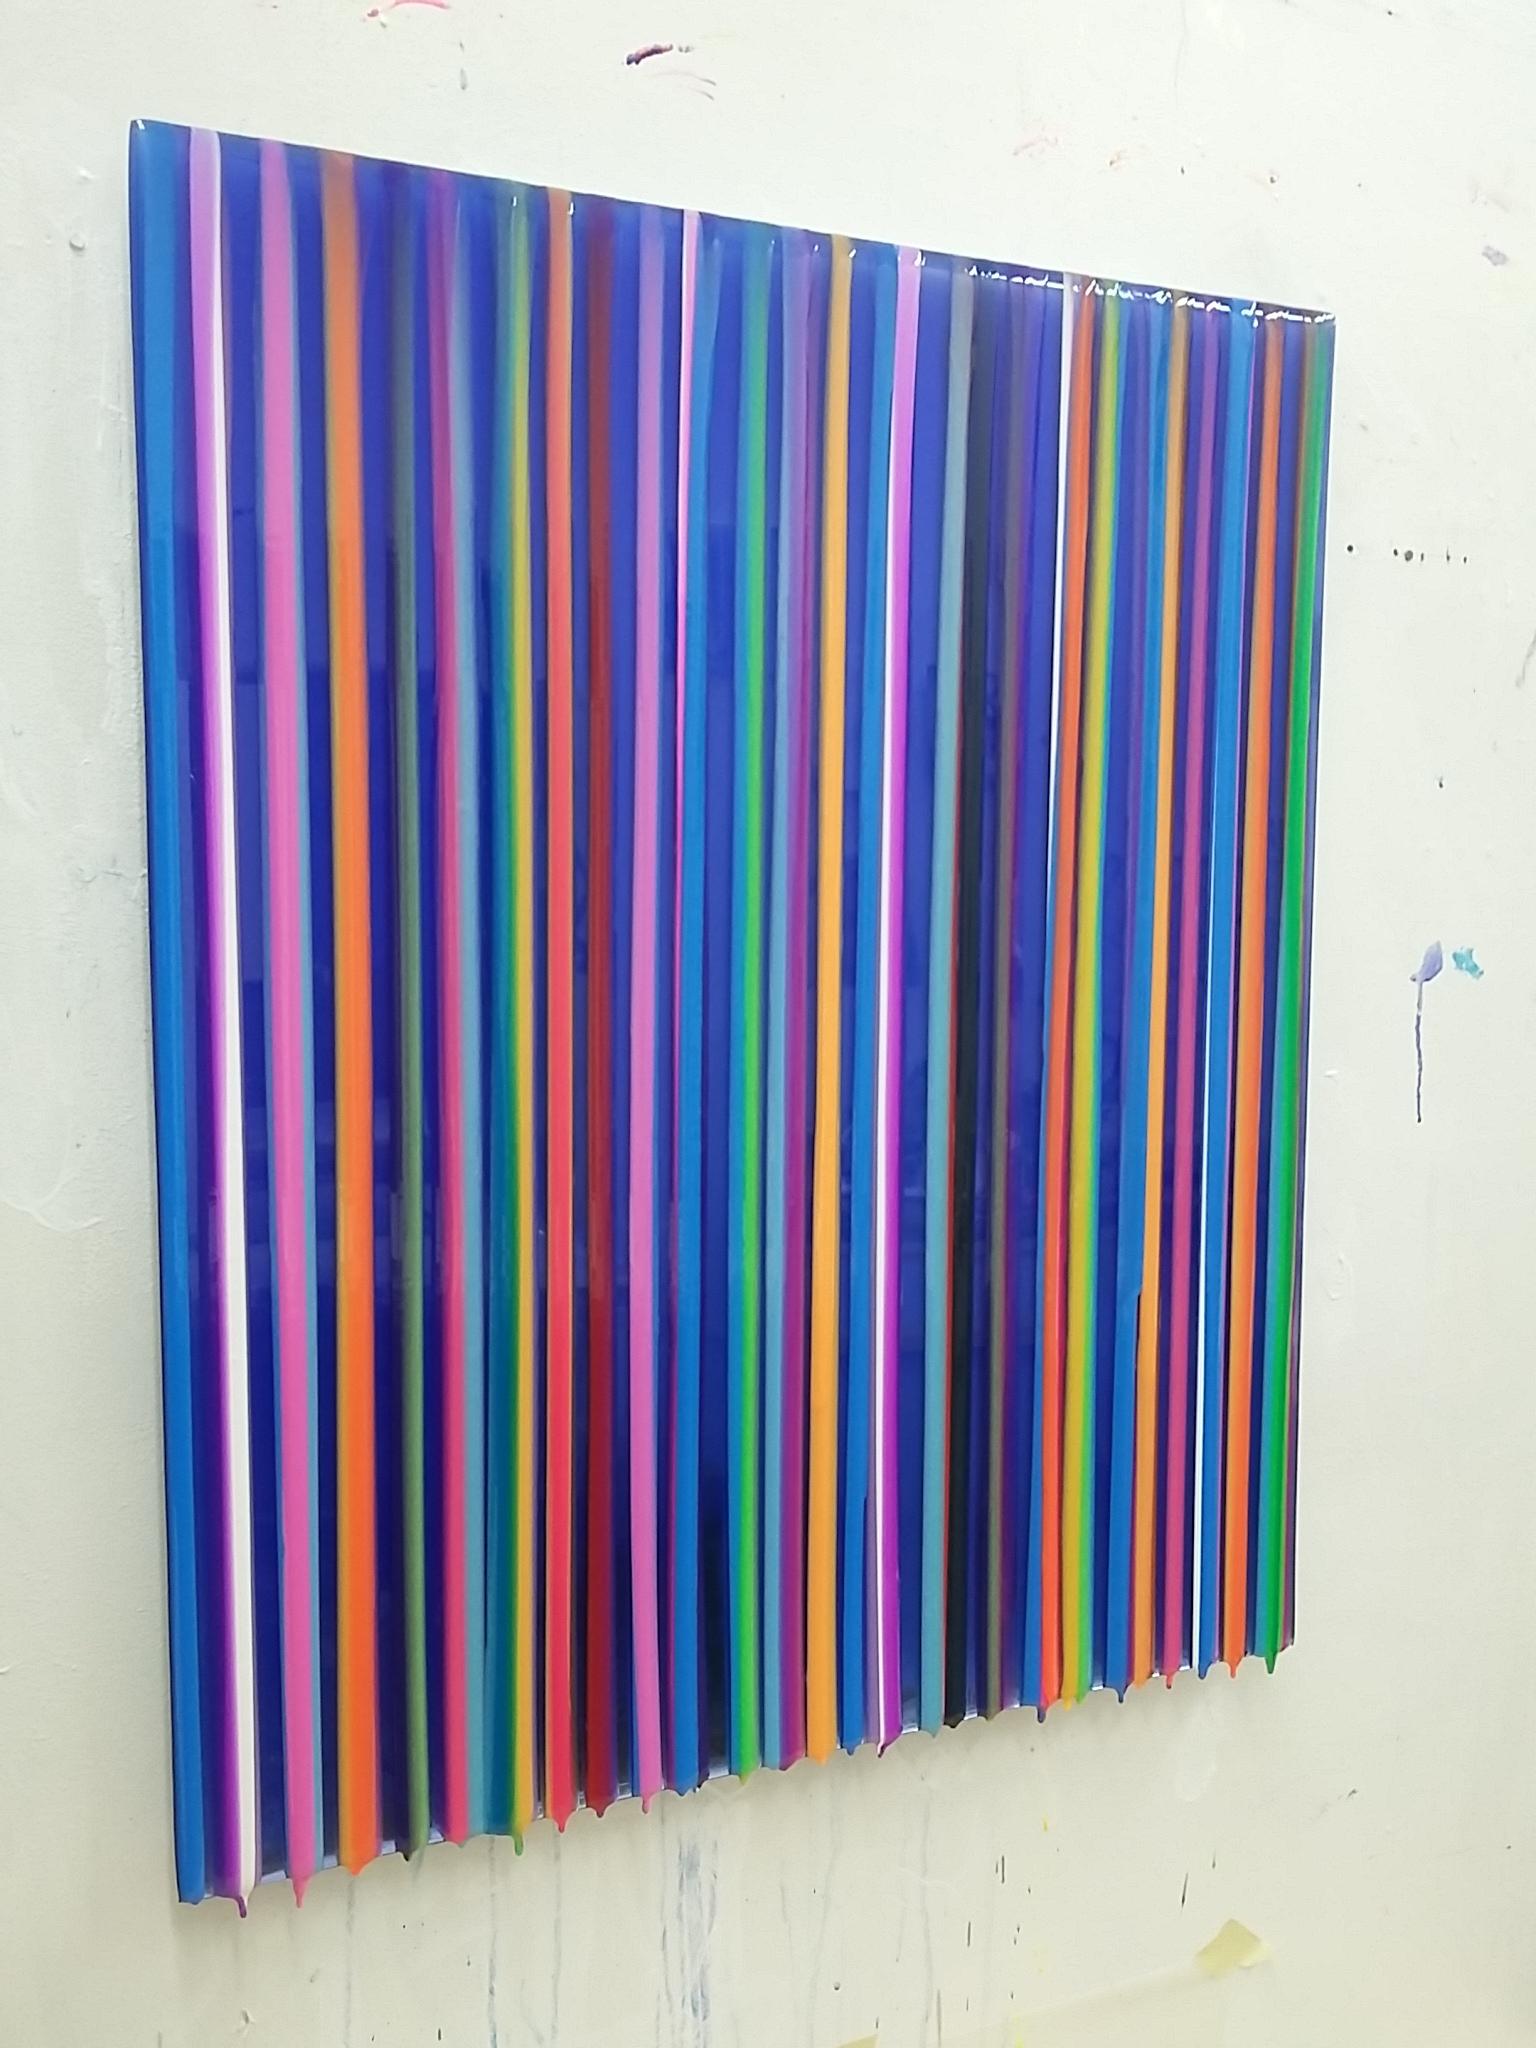 S1903 glossy multi colored striped painting - Contemporary Painting by Cathy Choi